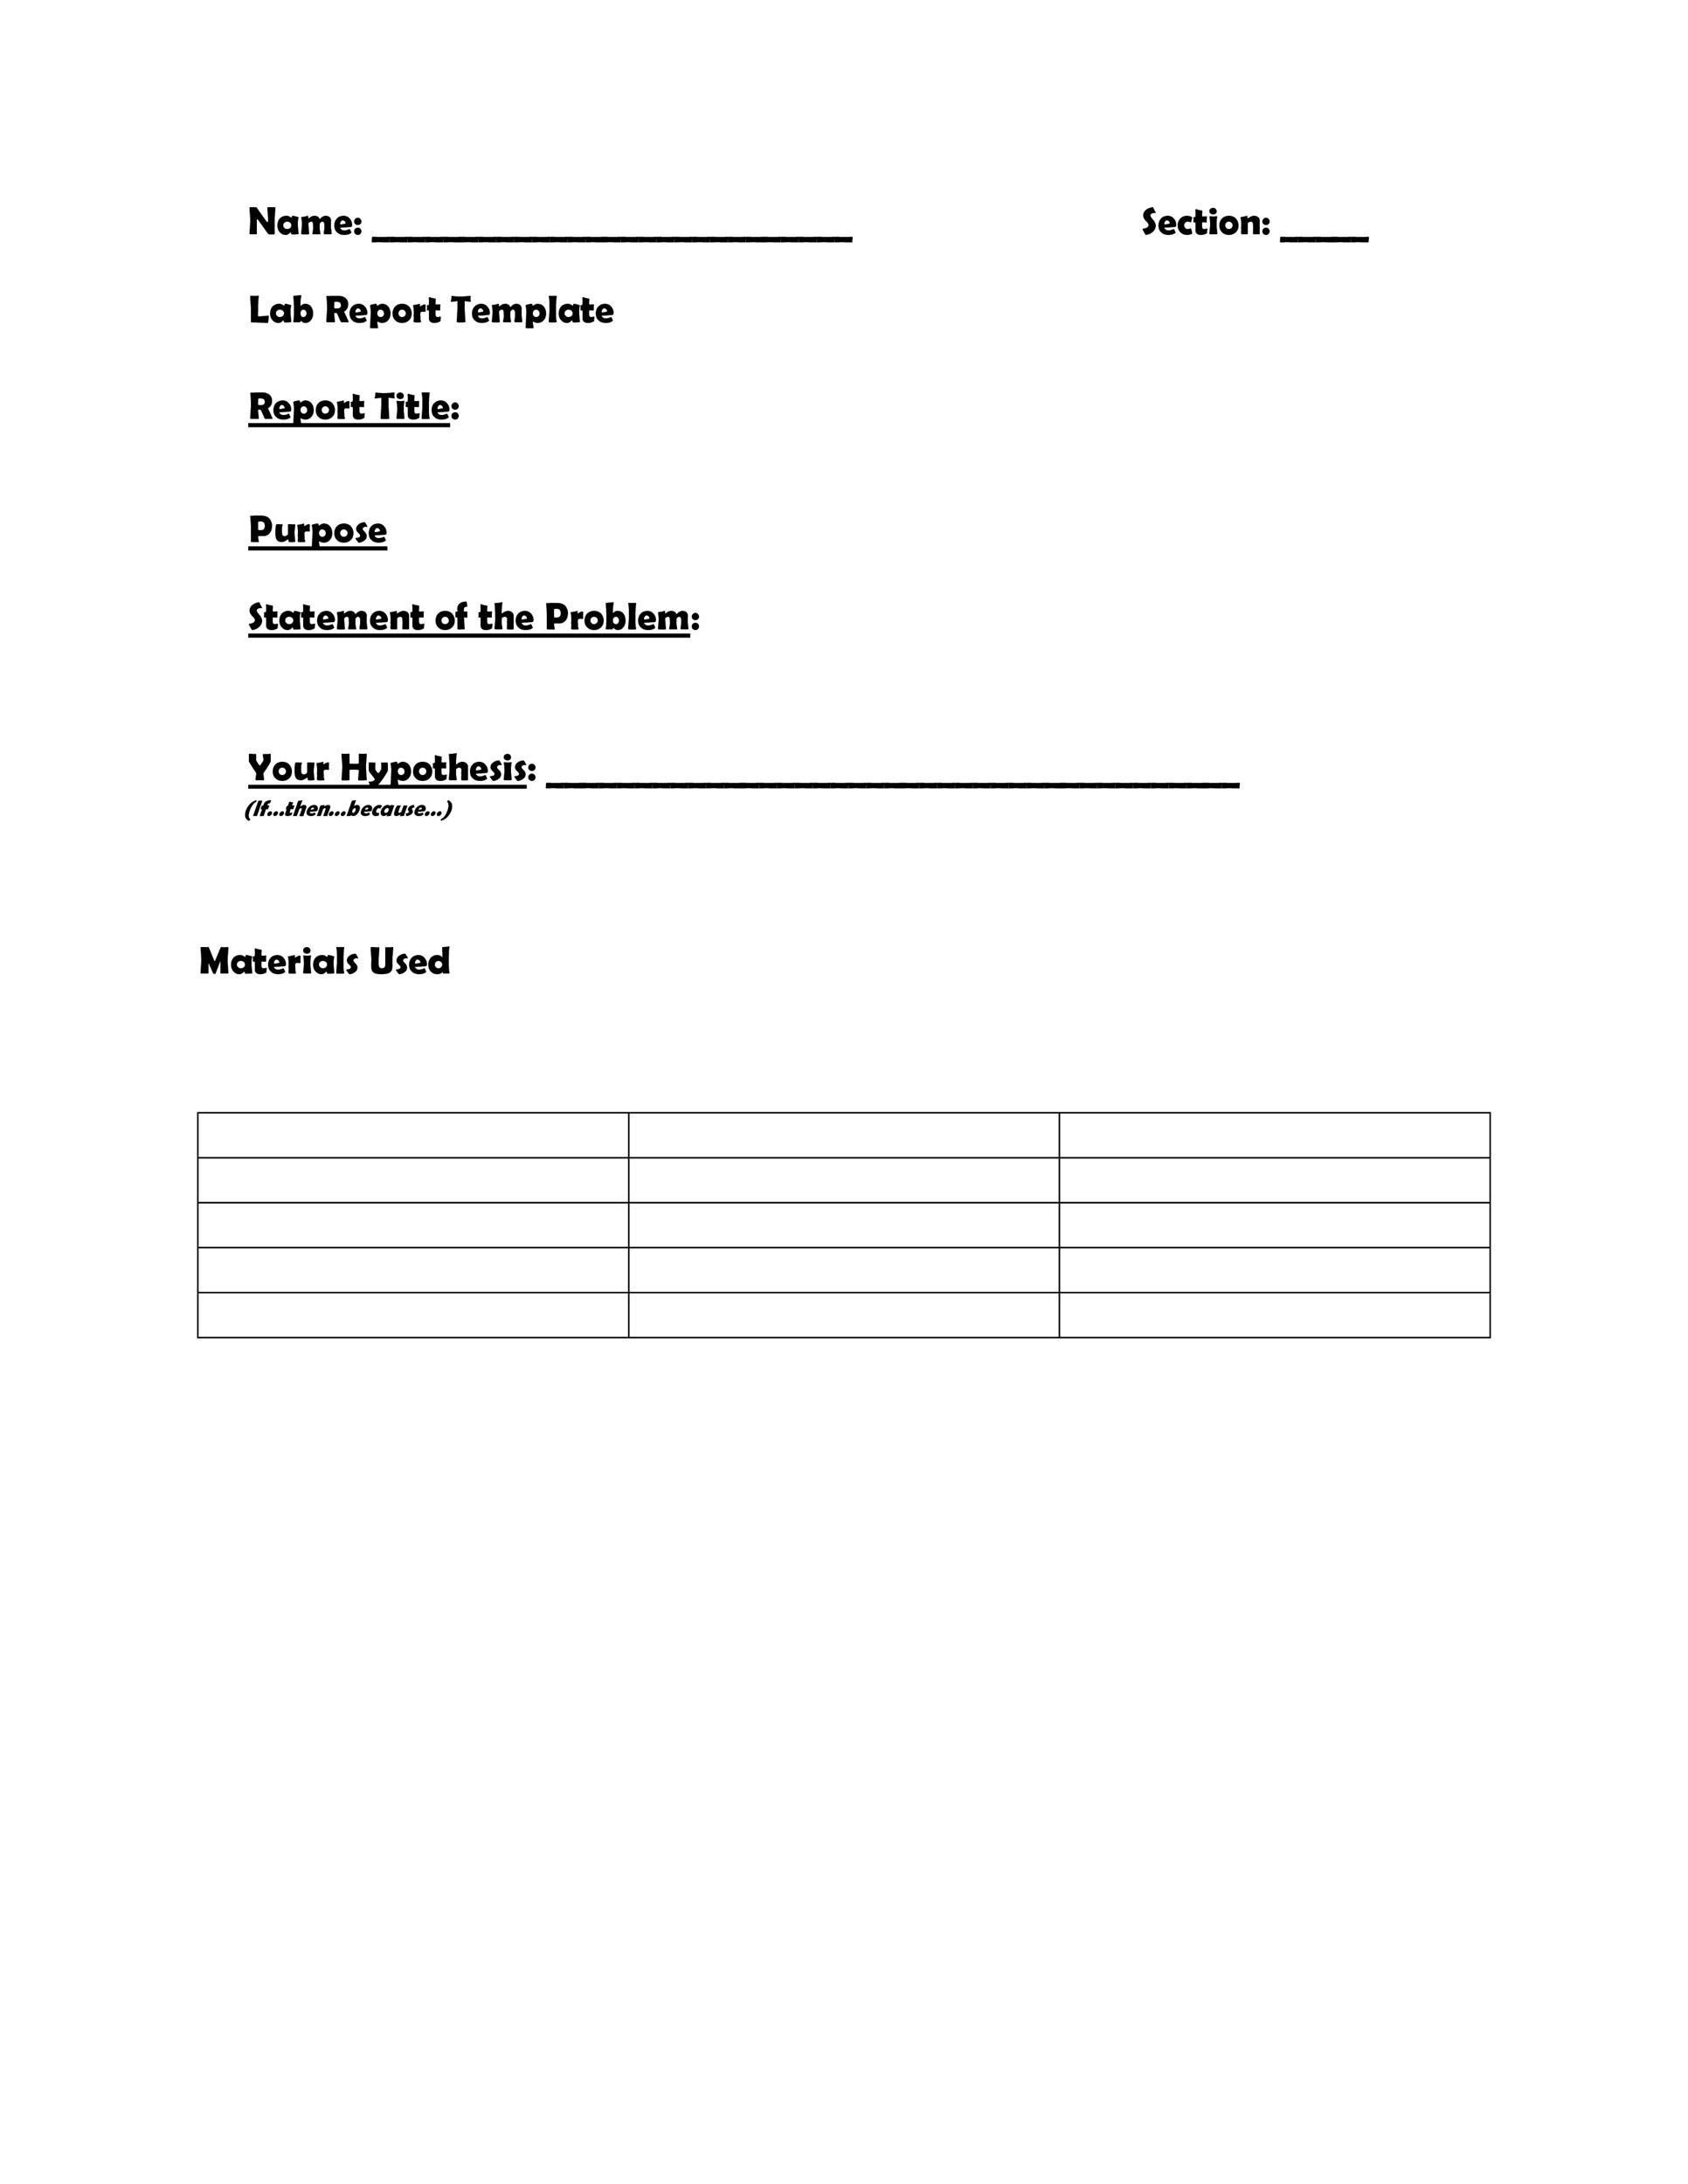 40-lab-report-templates-format-examples-templatelab